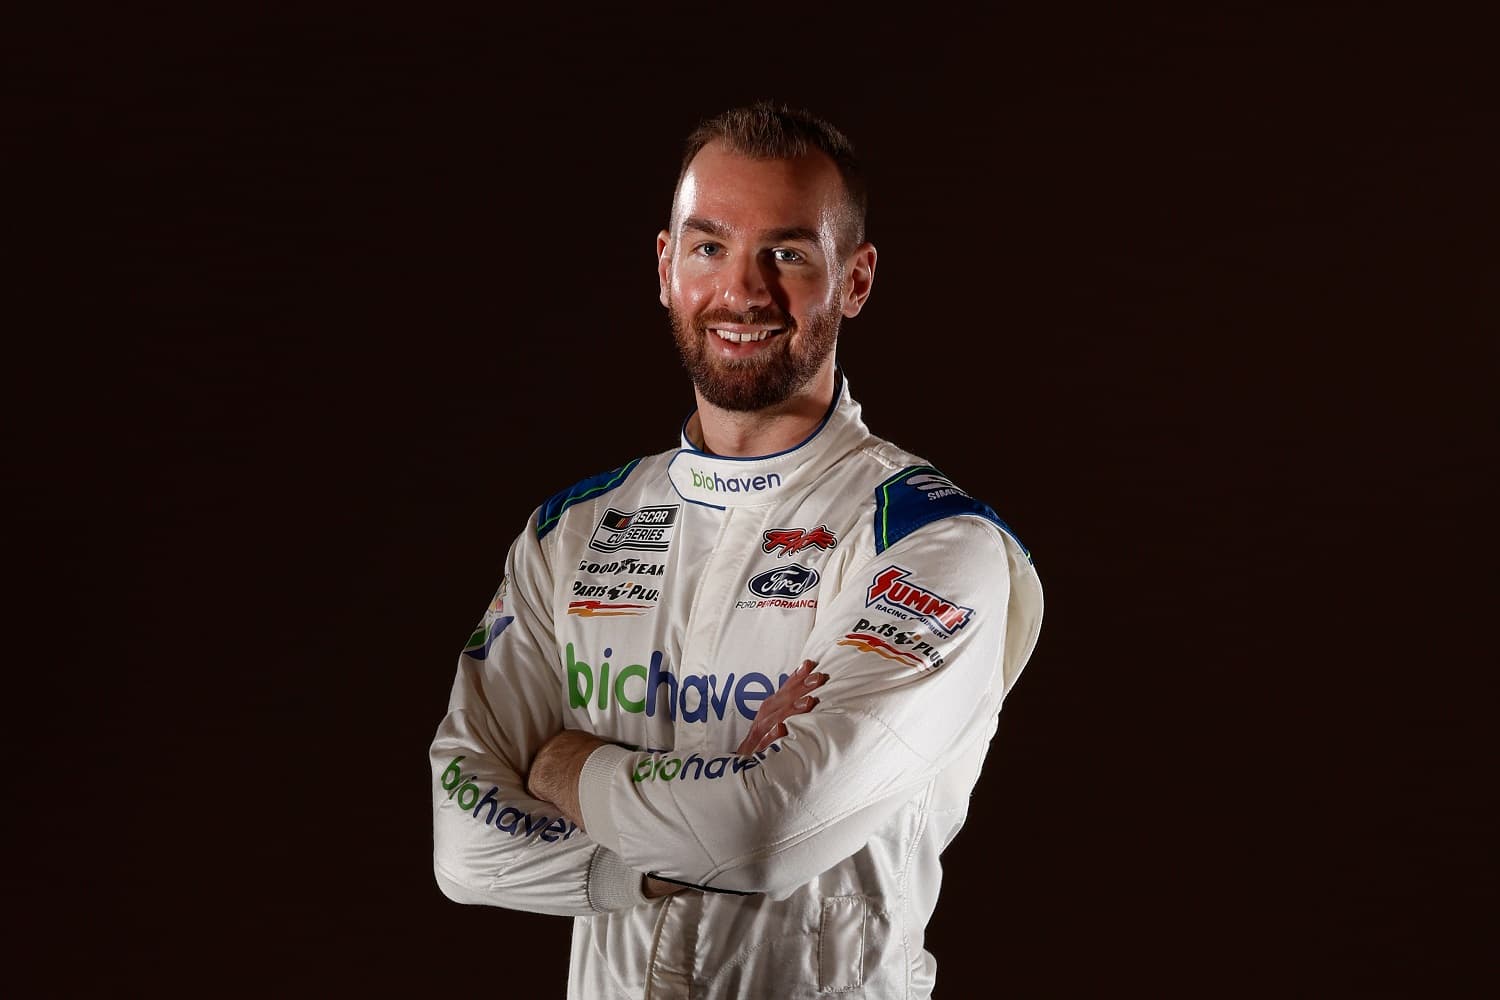 Driver Cody Ware poses for a photo during NASCAR Production Days at Charlotte Convention Center on Jan. 18, 2023, in Charlotte, North Carolina.